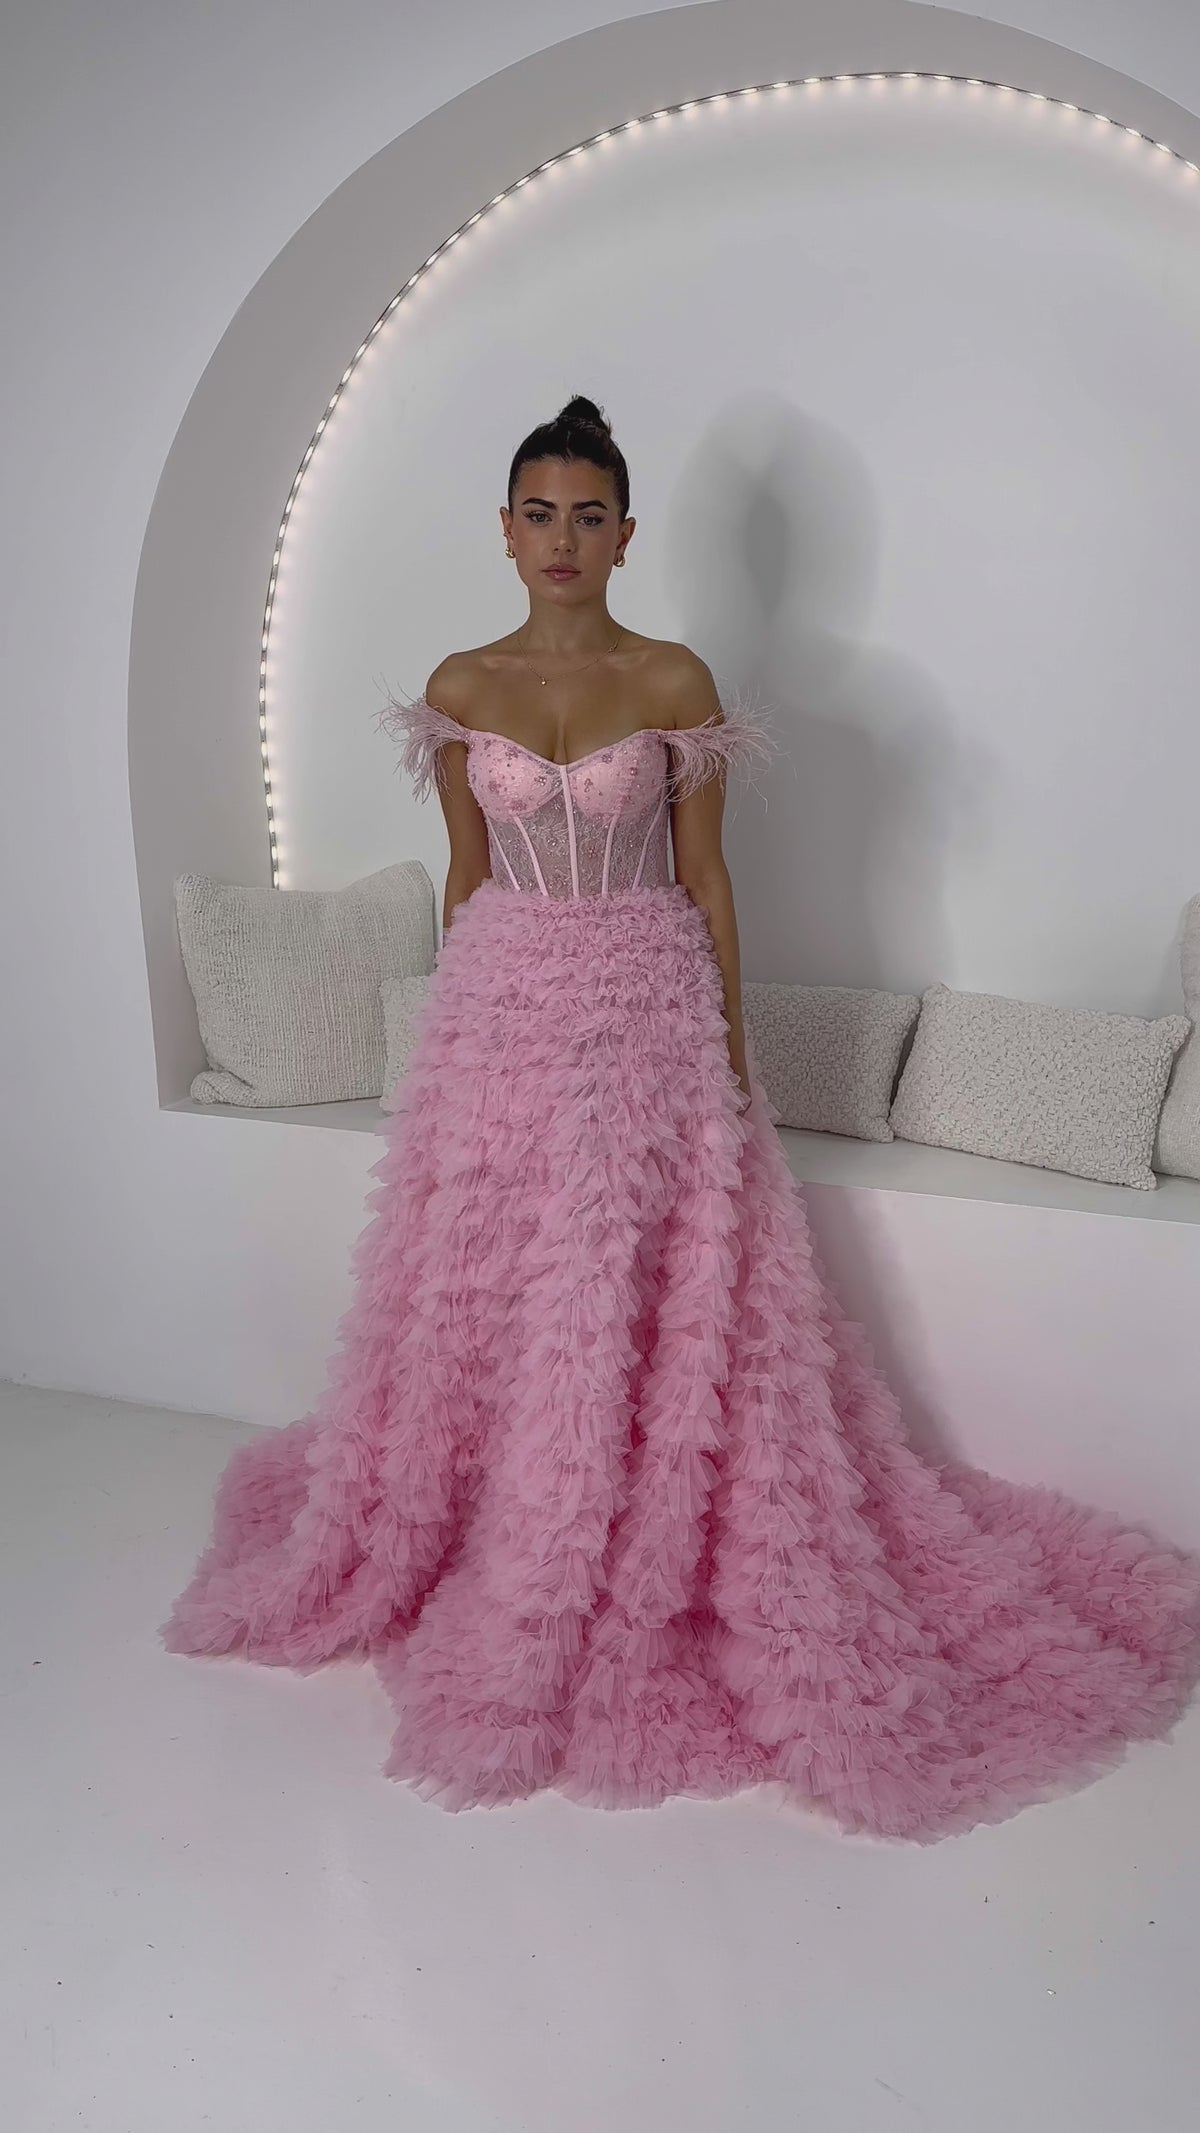 Rent SHERI HILL Azalea Gown (Pink) - Rent this style!